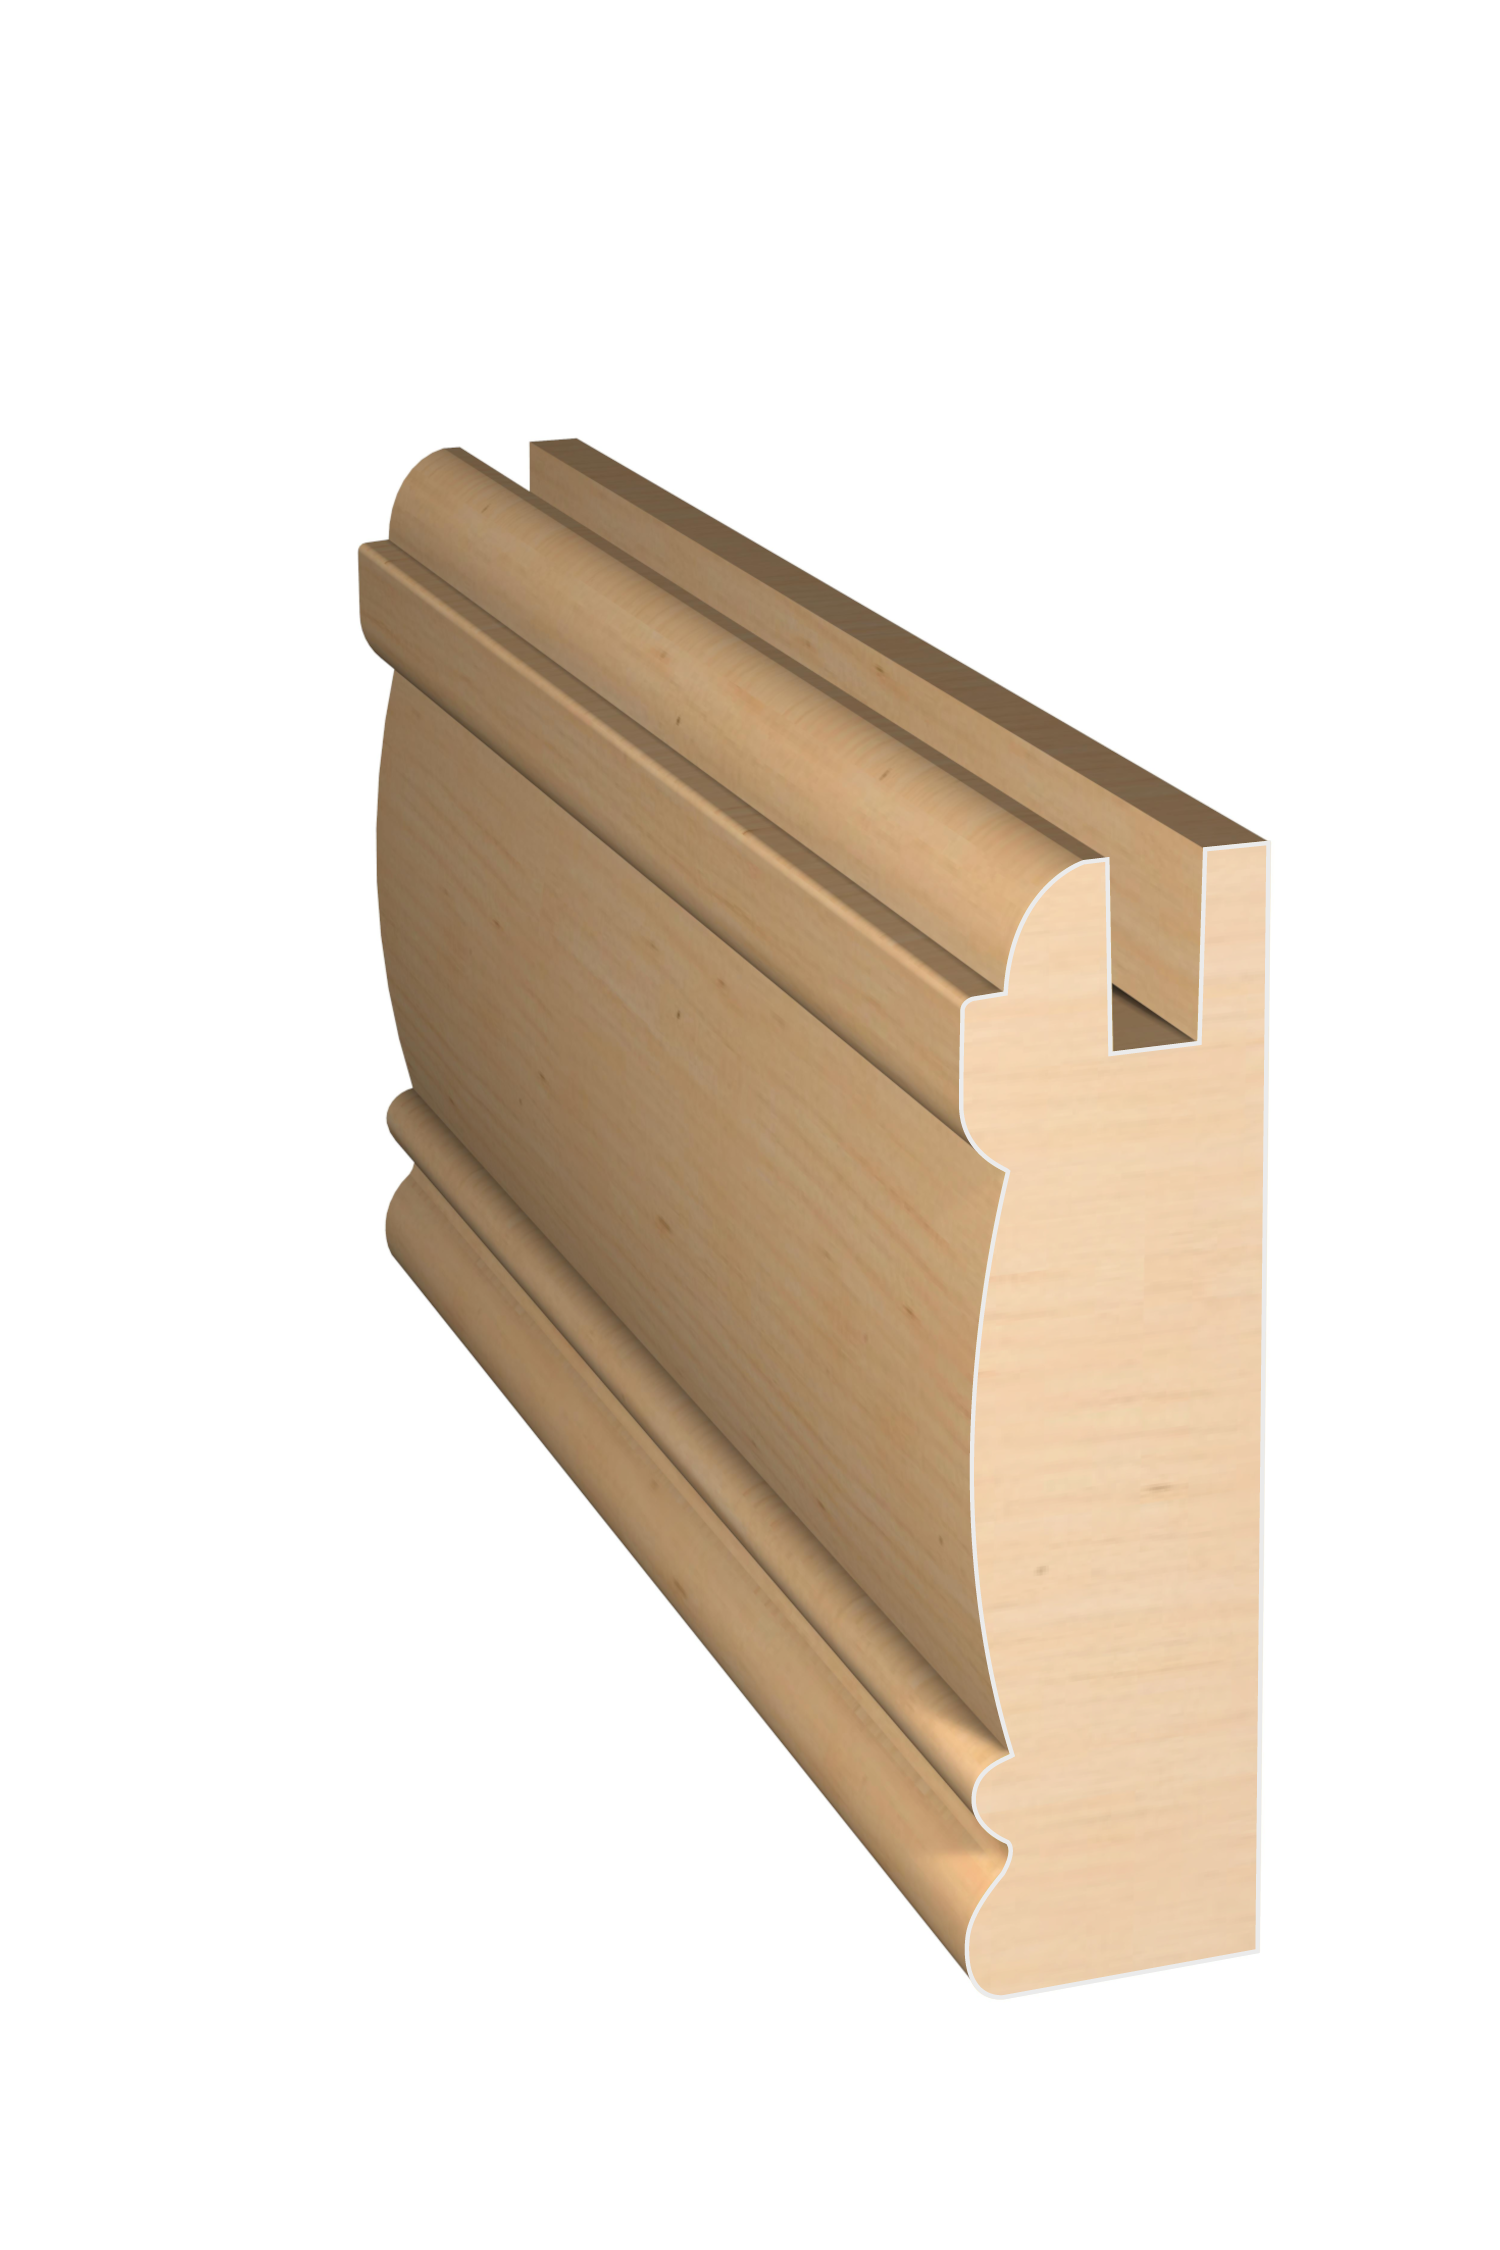 Three dimensional rendering of custom cabinet rail wood molding CABPL32 made by Public Lumber Company in Detroit.